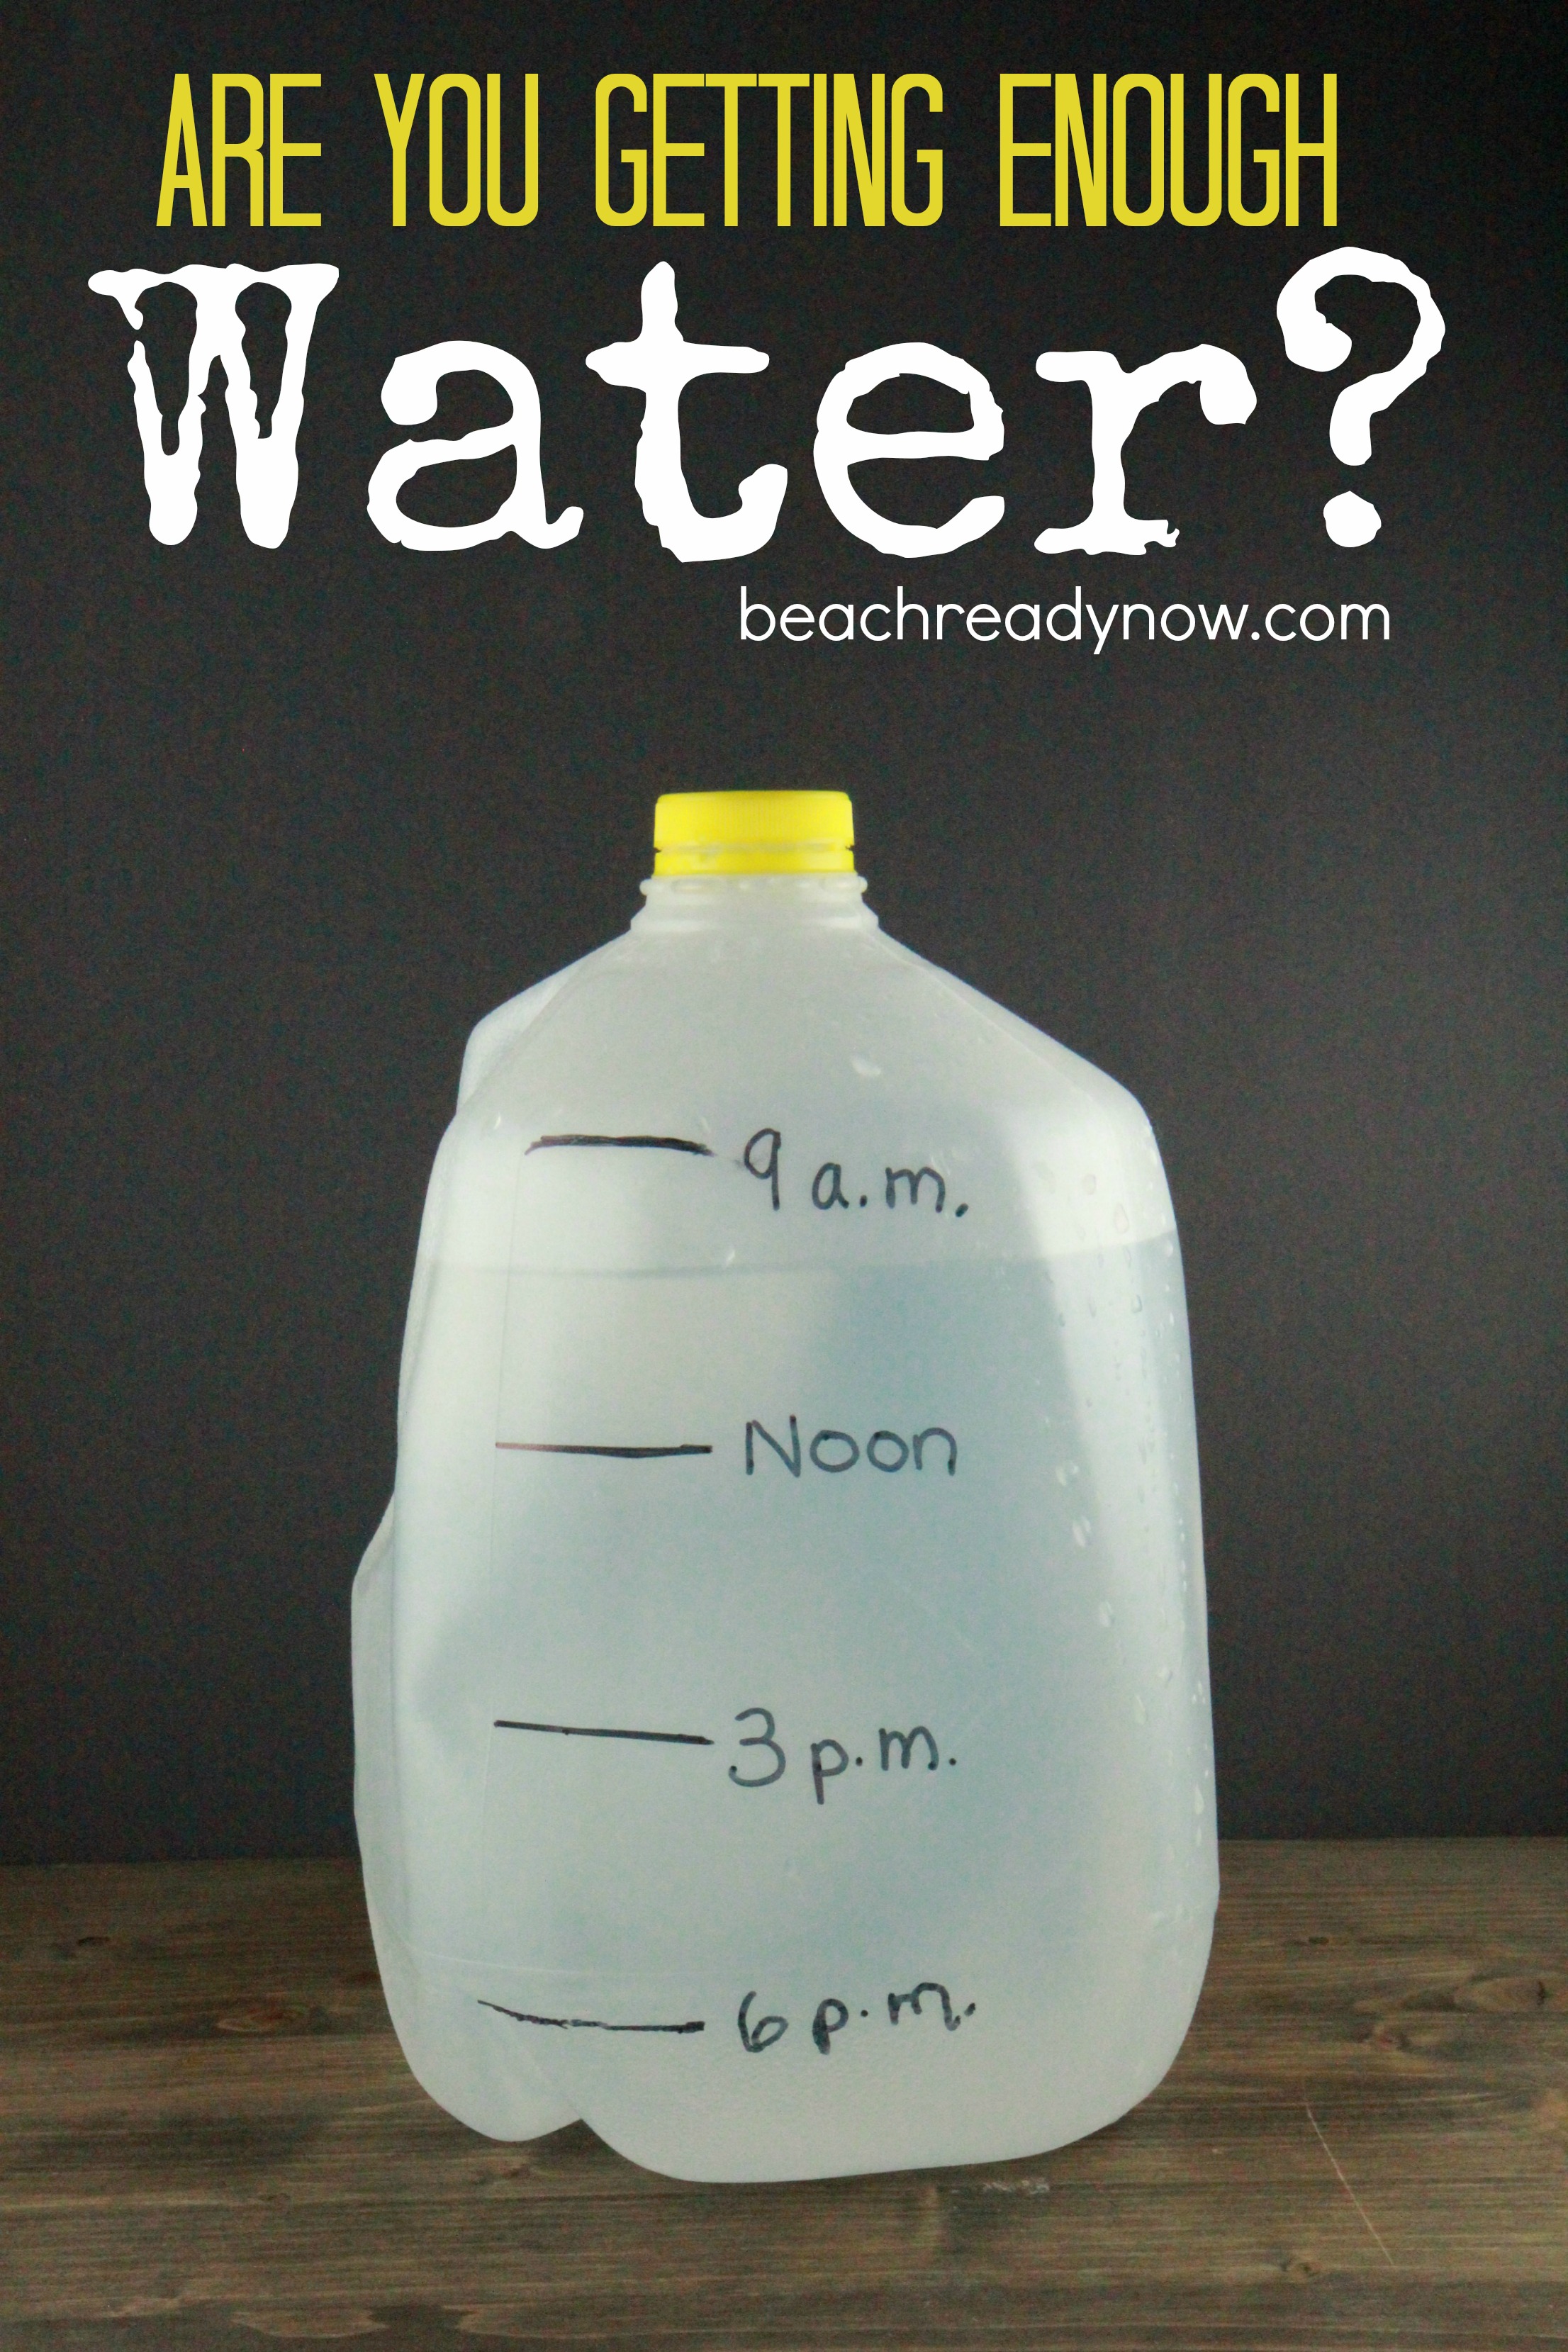 How Much Water Should I Be Drinking? - Beach Ready Now